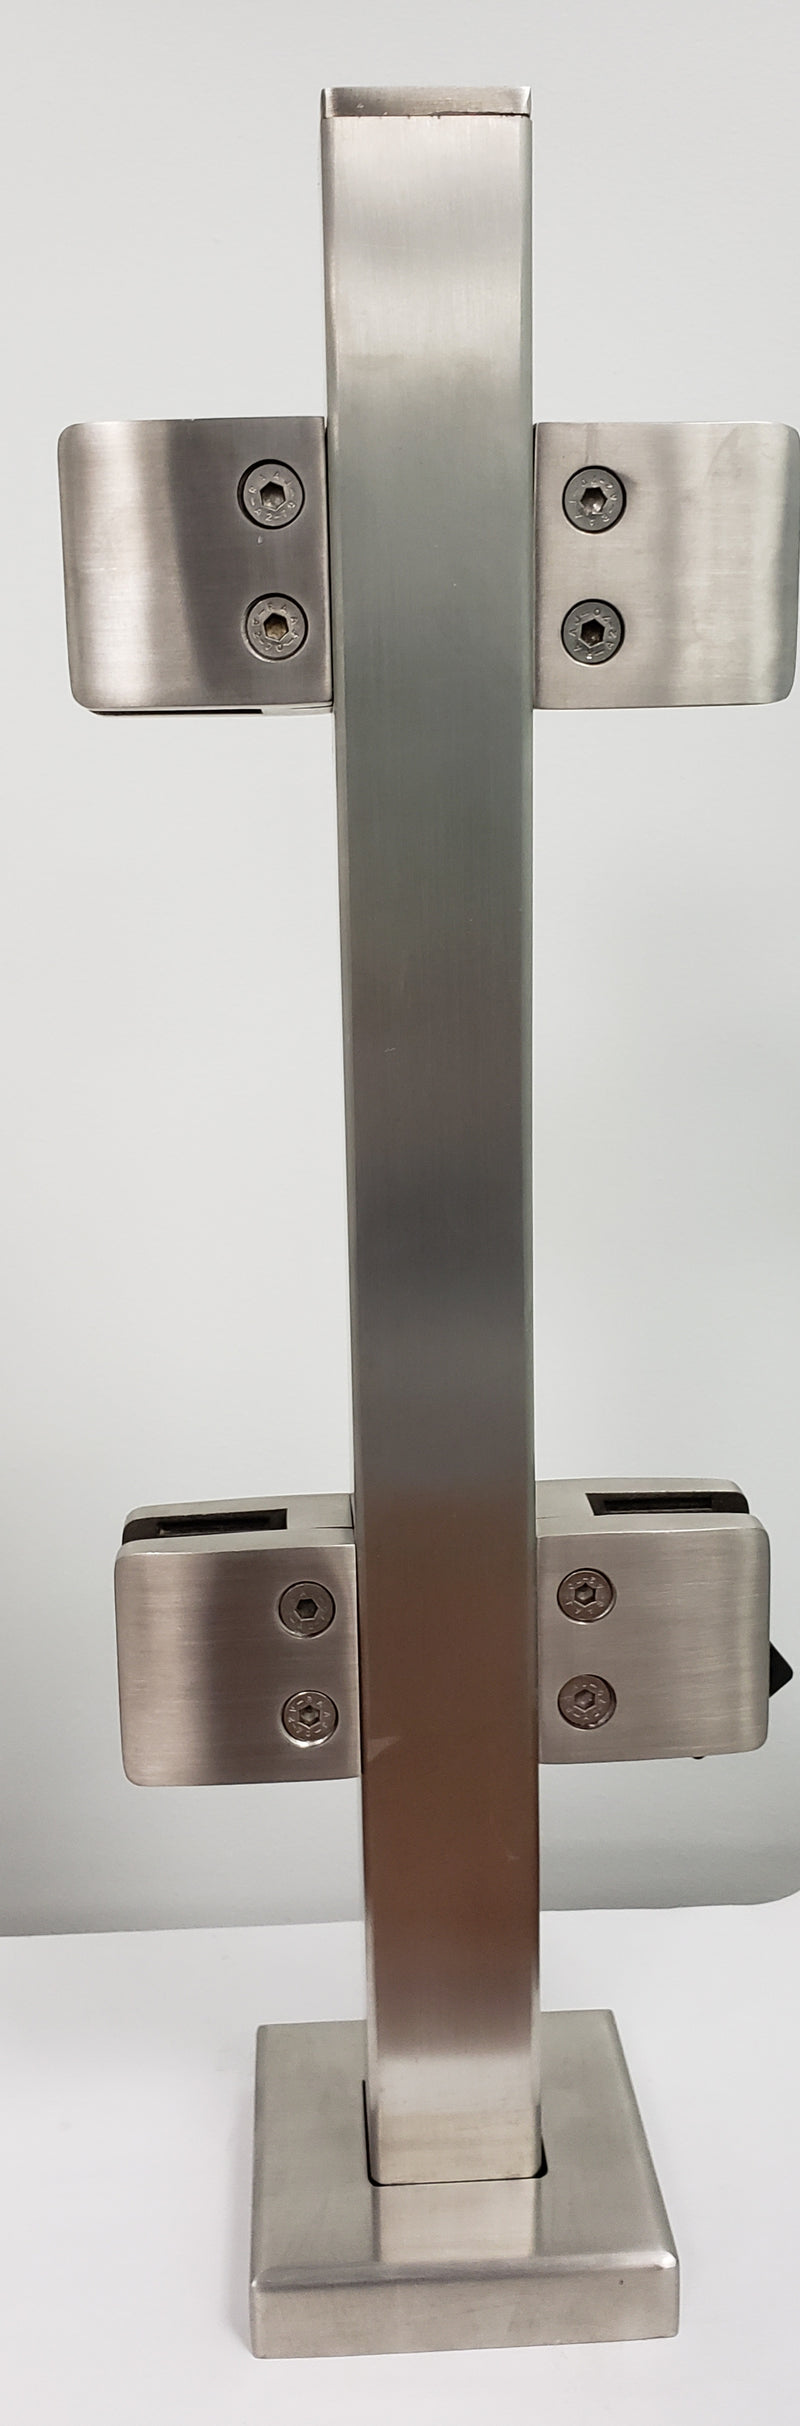 IPSQSNEEZEBS Square Sneeze Guard Stainless Steel Post SS316